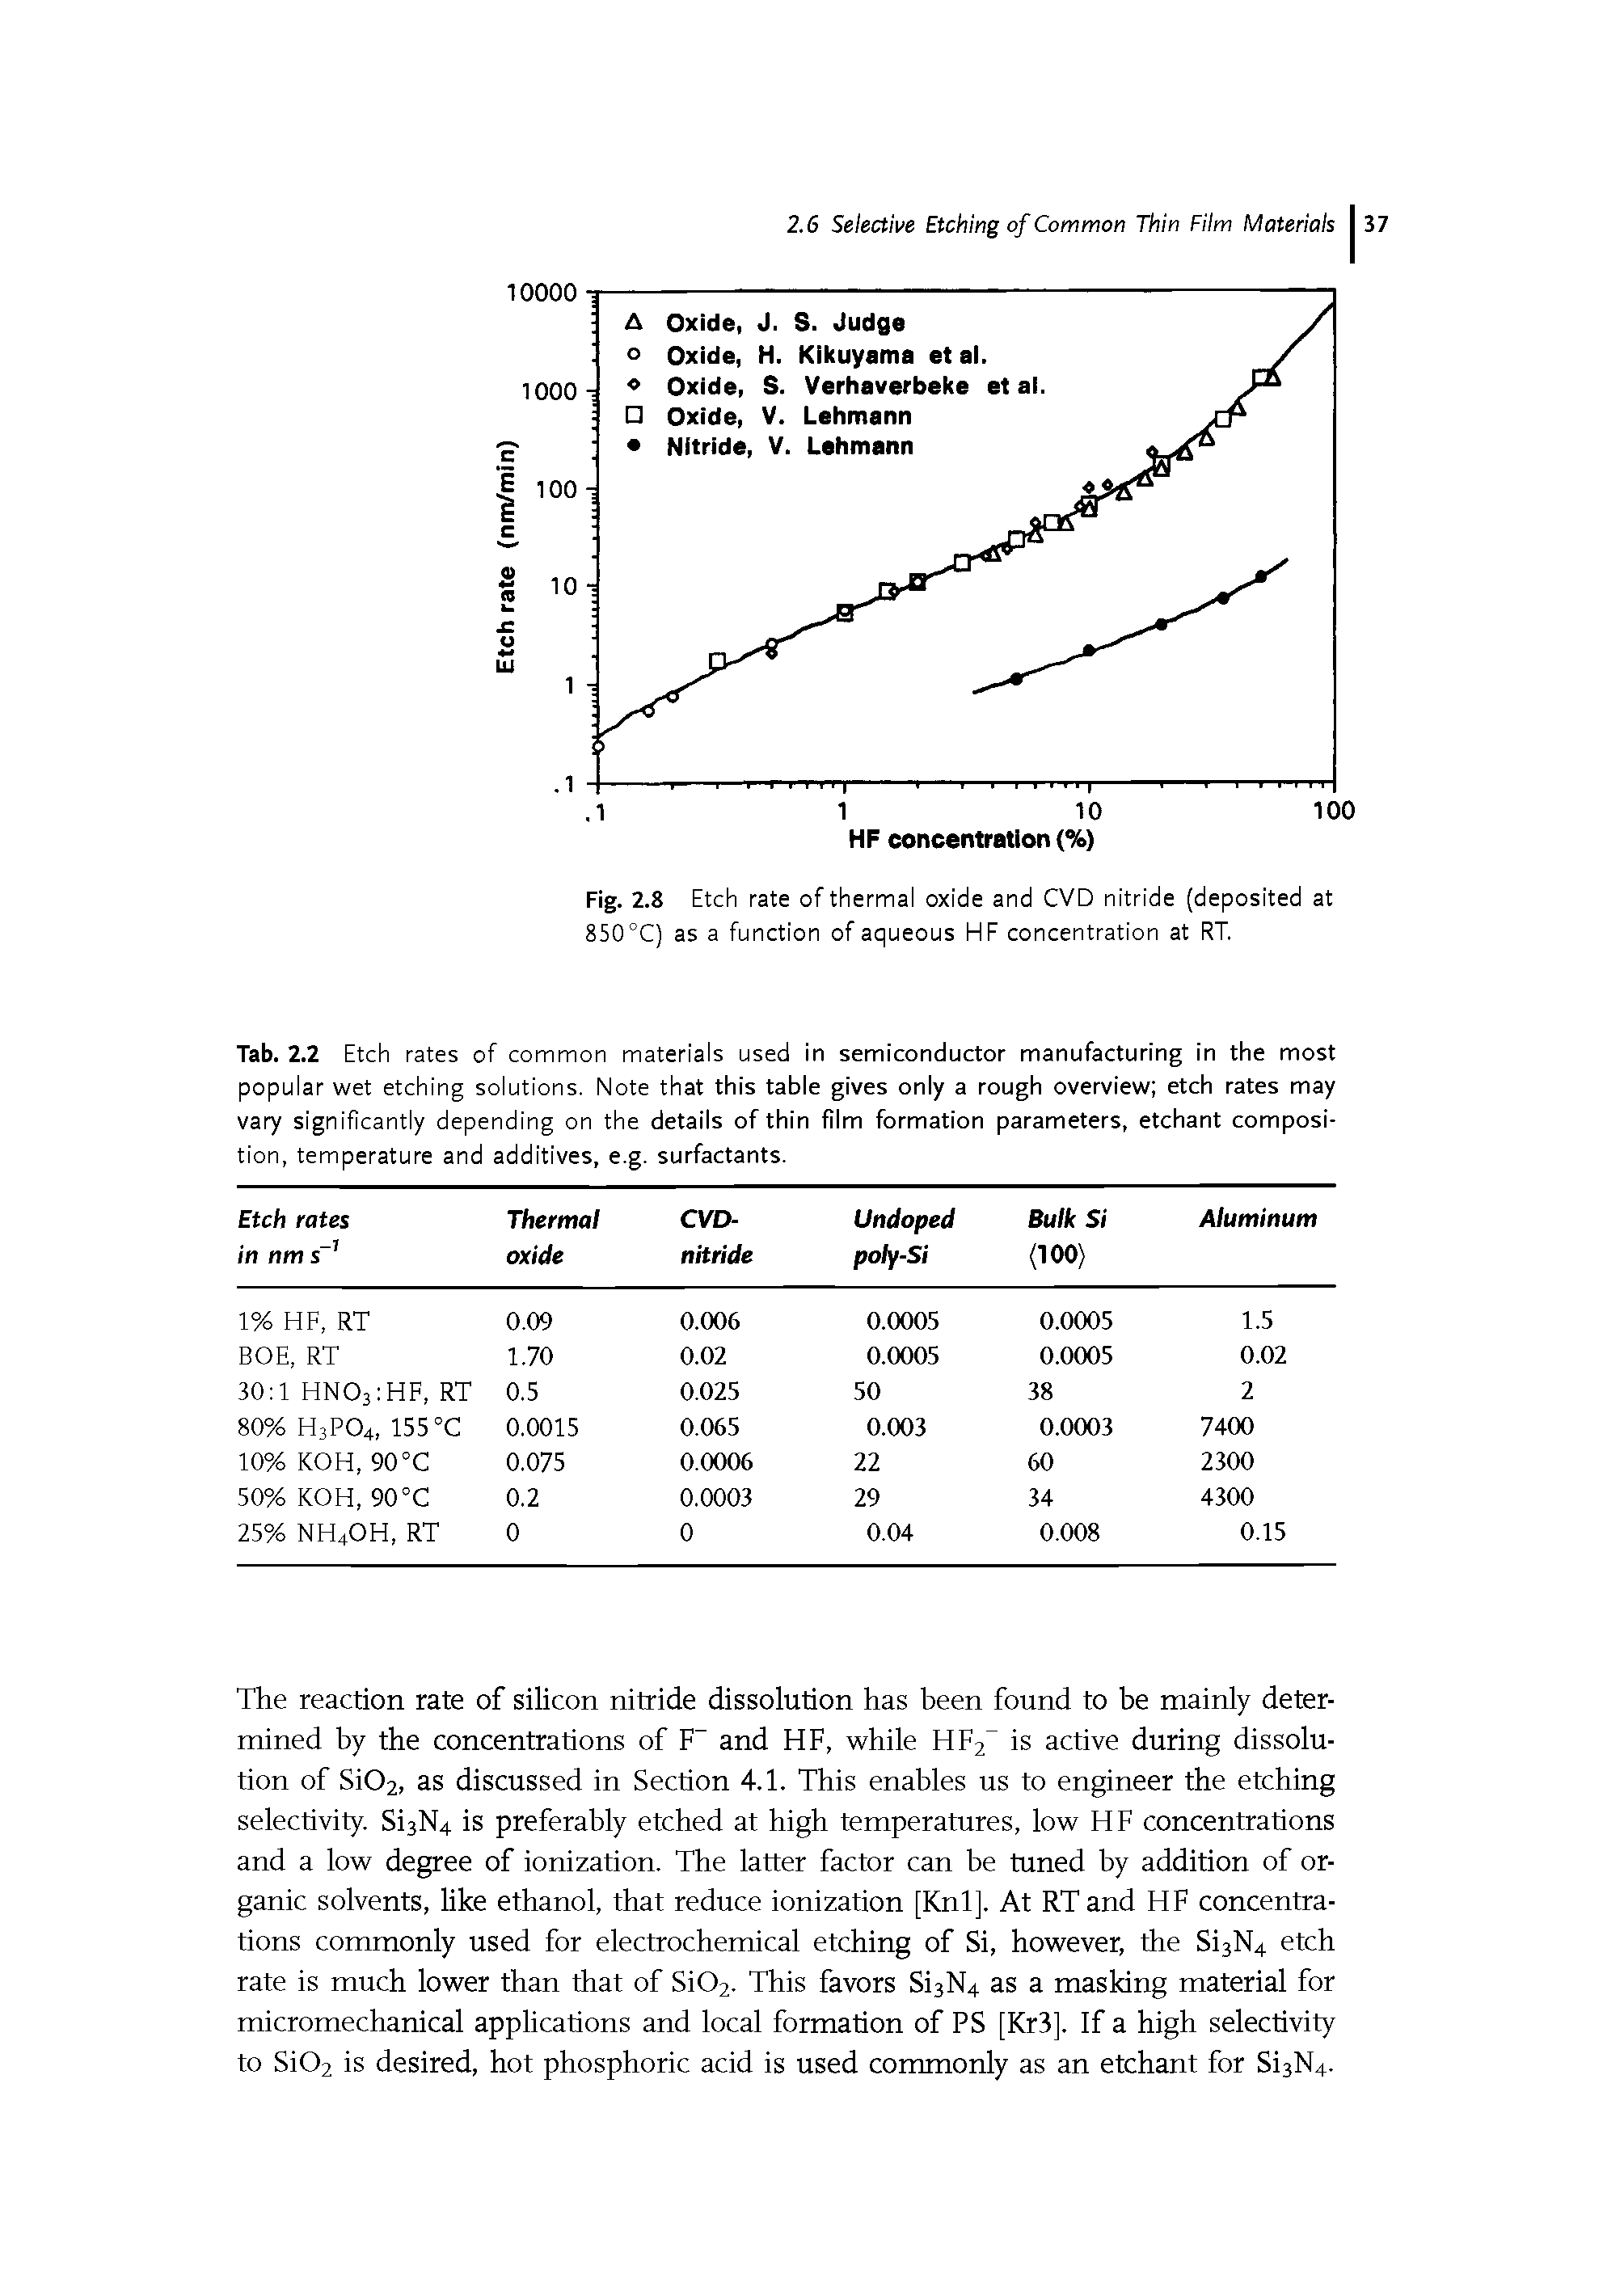 Tab. 2.2 Etch rates of common materials used in semiconductor manufacturing in the most popular wet etching solutions. Note that this table gives only a rough overview etch rates may vary significantly depending on the details of thin film formation parameters, etchant composition, temperature and additives, e.g. surfactants.